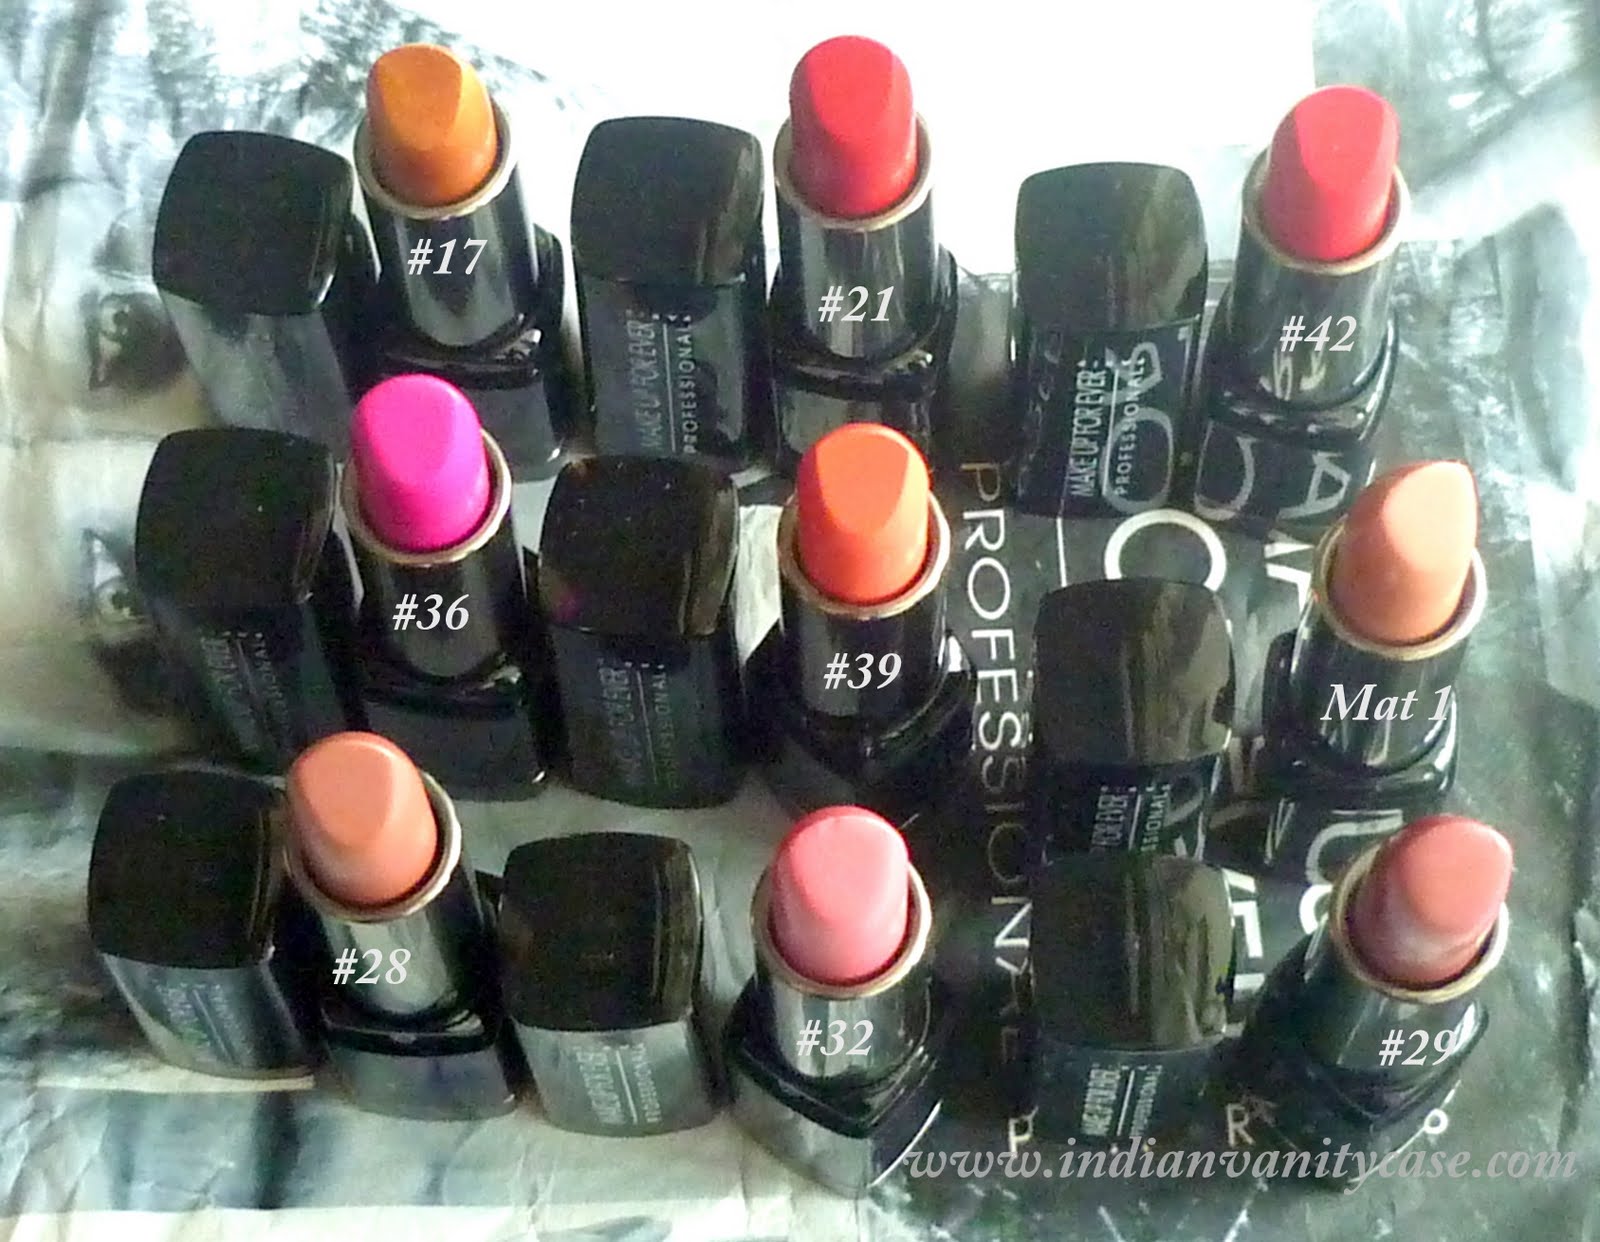 MAKE UP FOR EVER Rouge Artist Intense #40 - Reviews